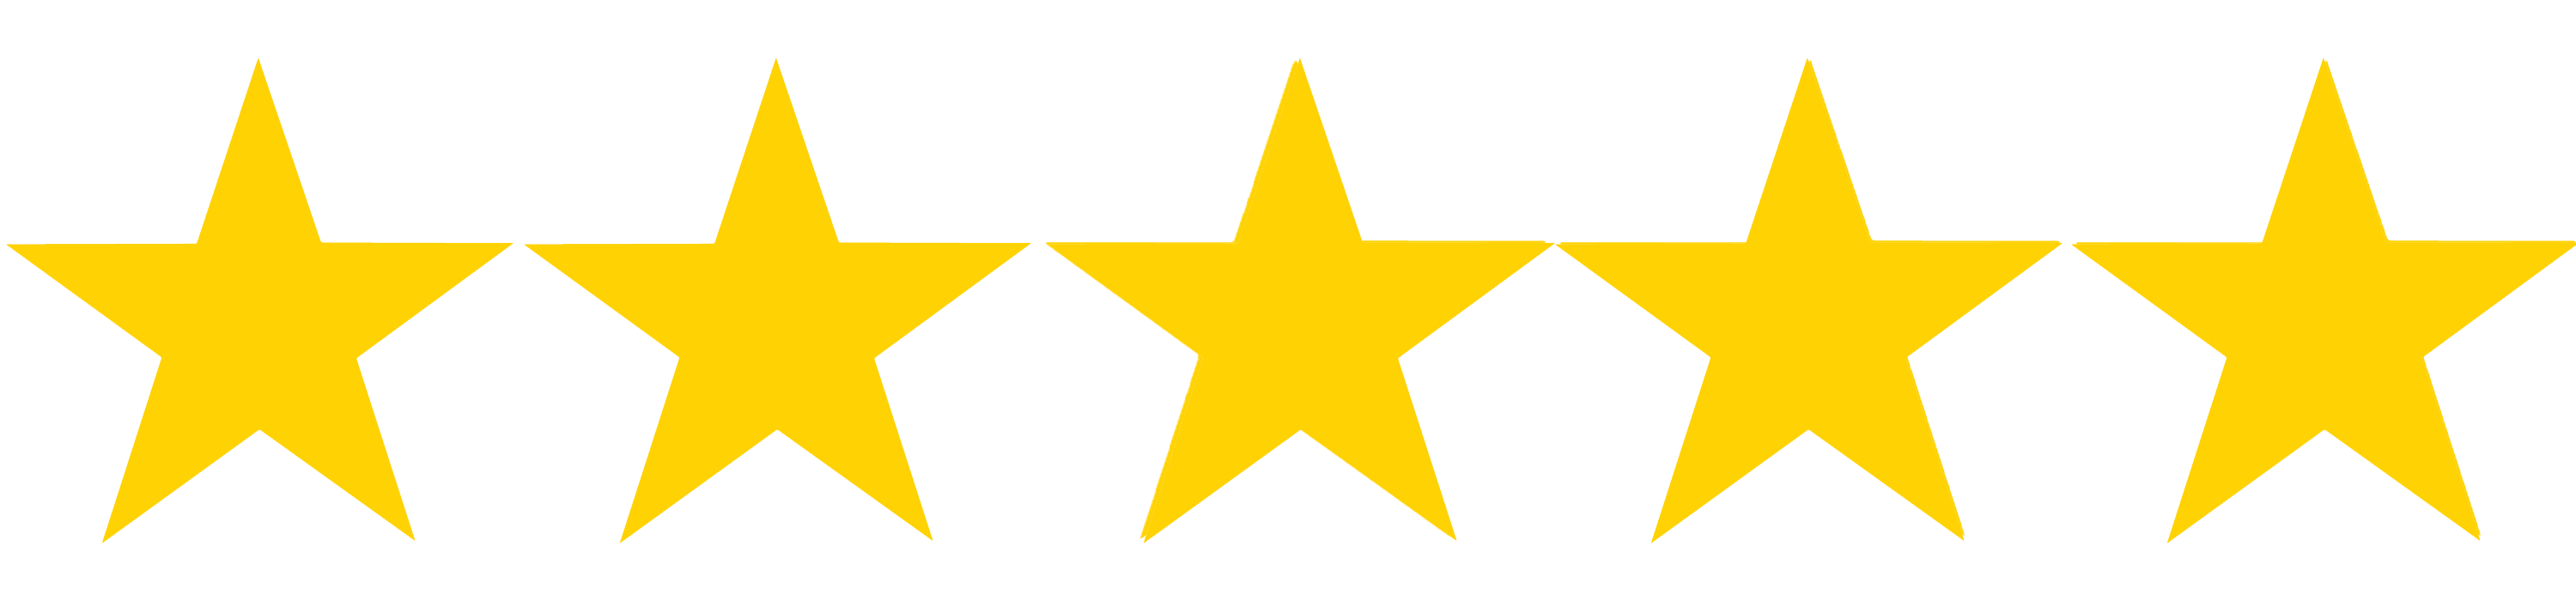 Five Star Review Image